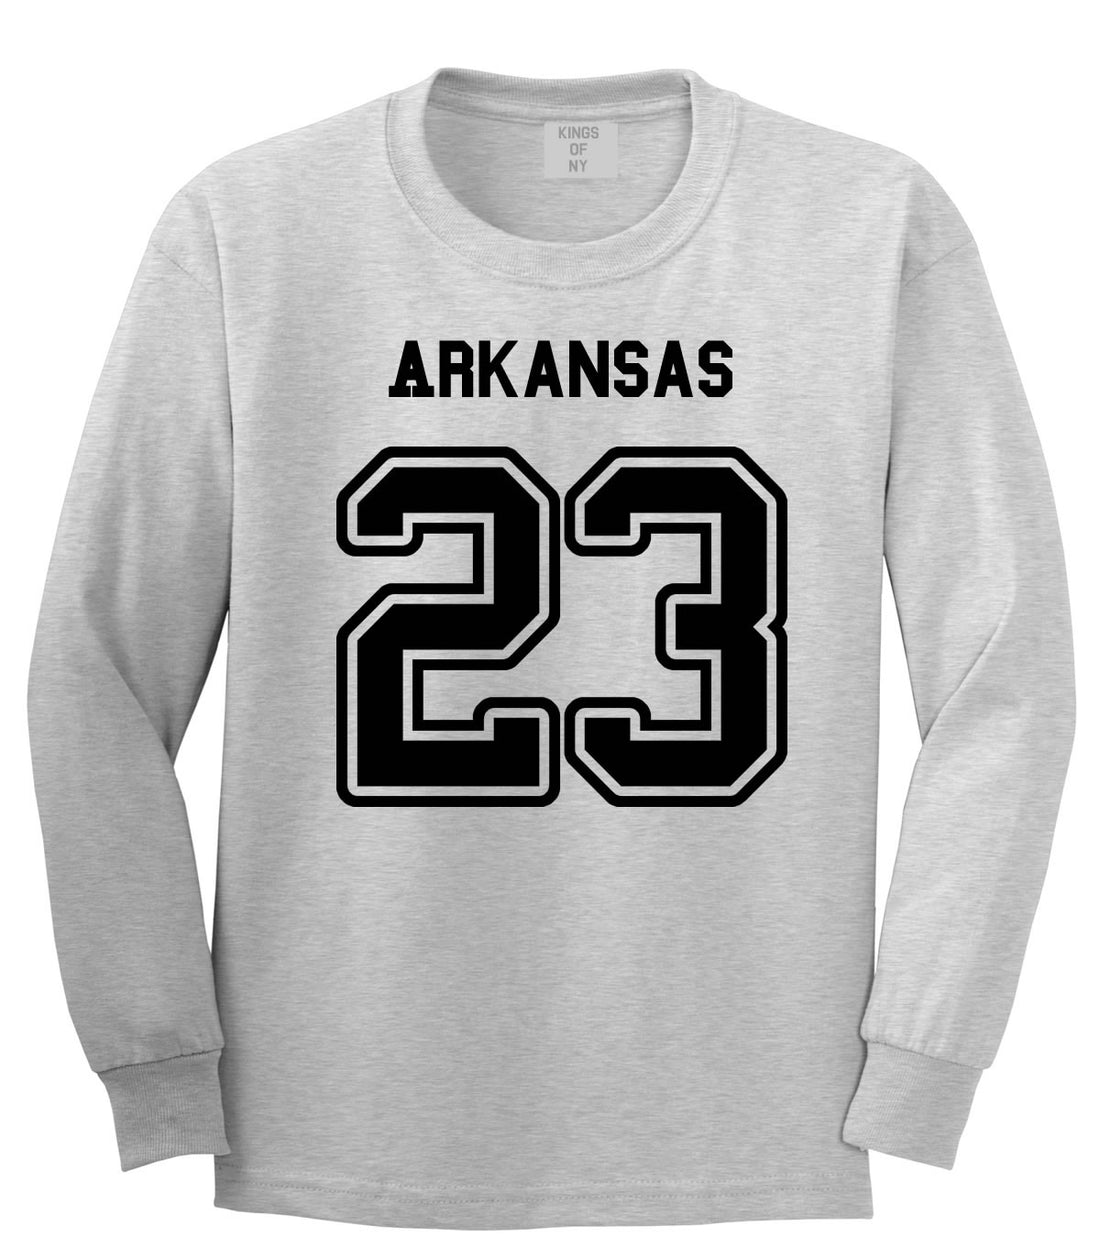 Sport Style Arkansas 23 Team State Jersey Long Sleeve T-Shirt By Kings Of NY